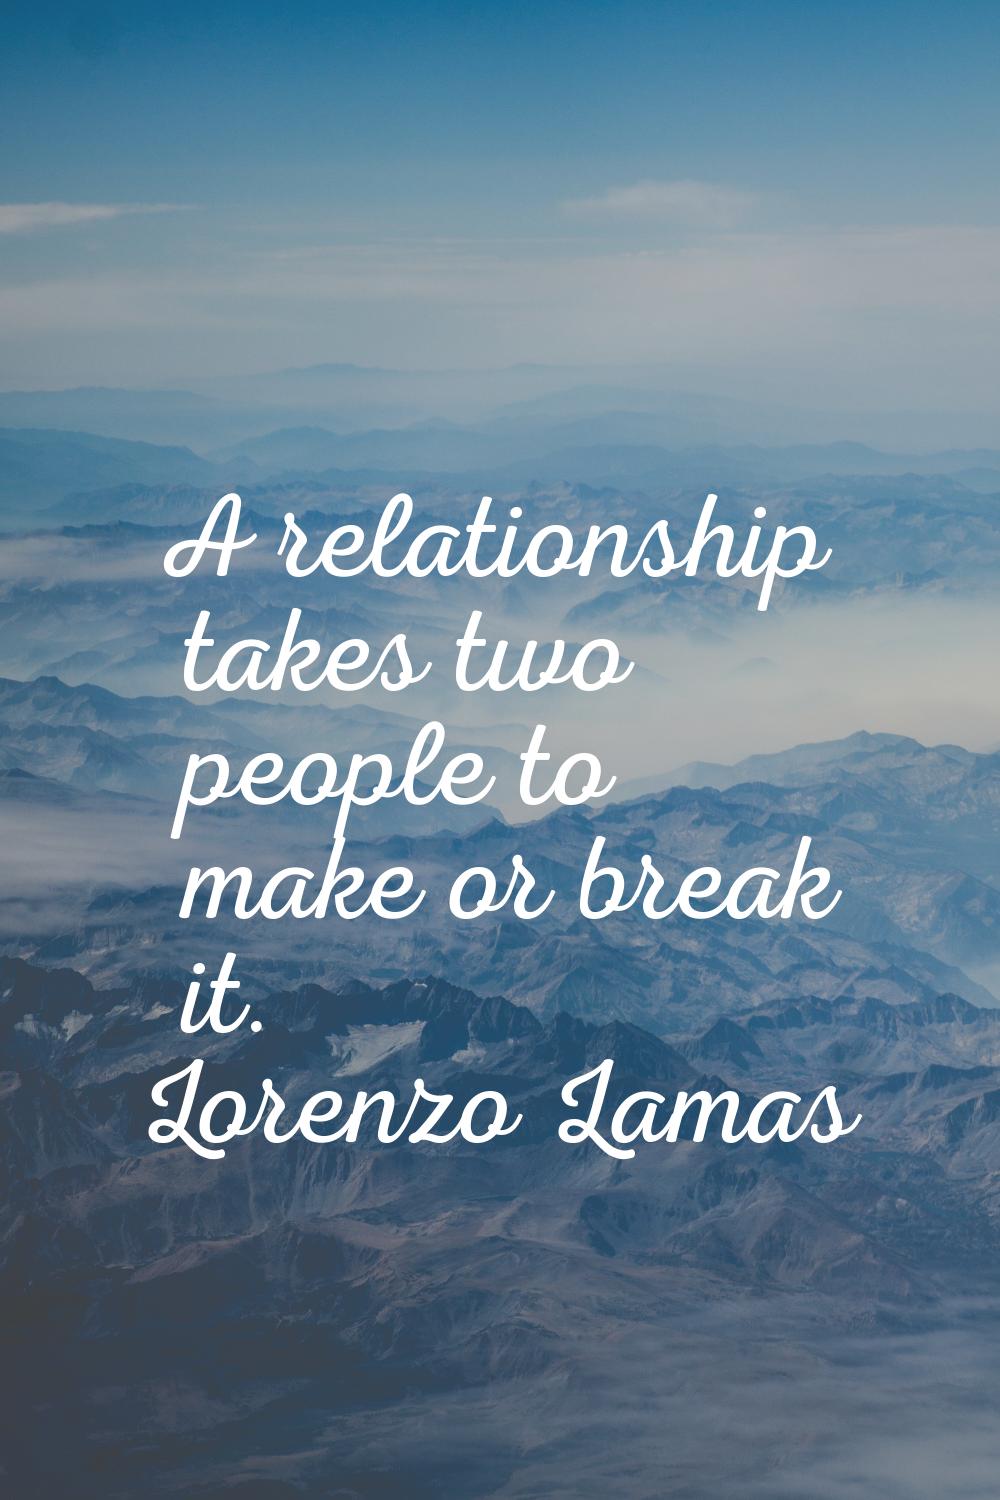 A relationship takes two people to make or break it.